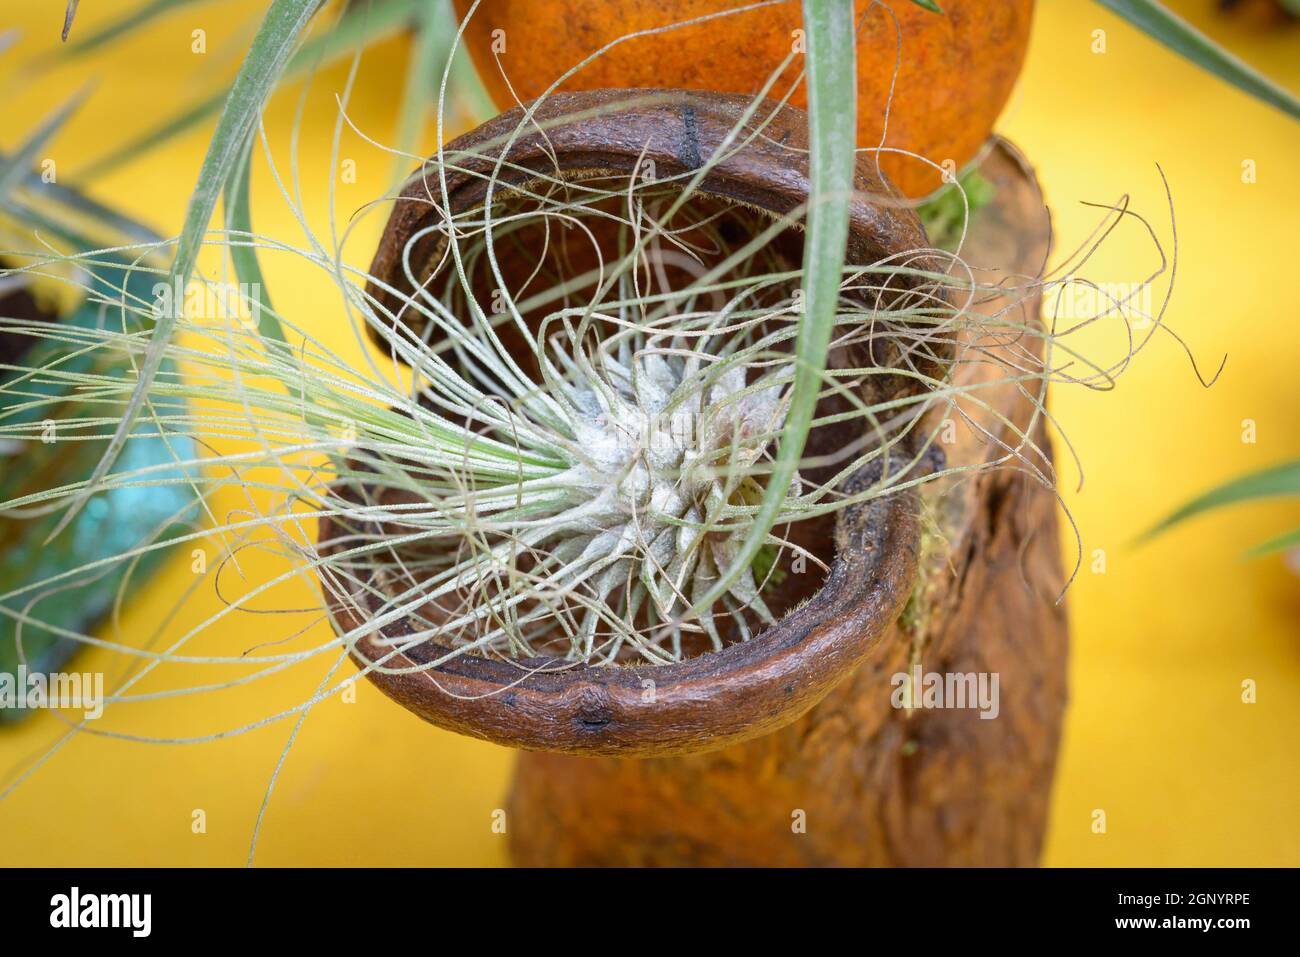 Nice composition of Tillandsia, species of evergreen, perennial flowering plants in the family Bromeliaceae, native to the forests, mountains and dese Stock Photo